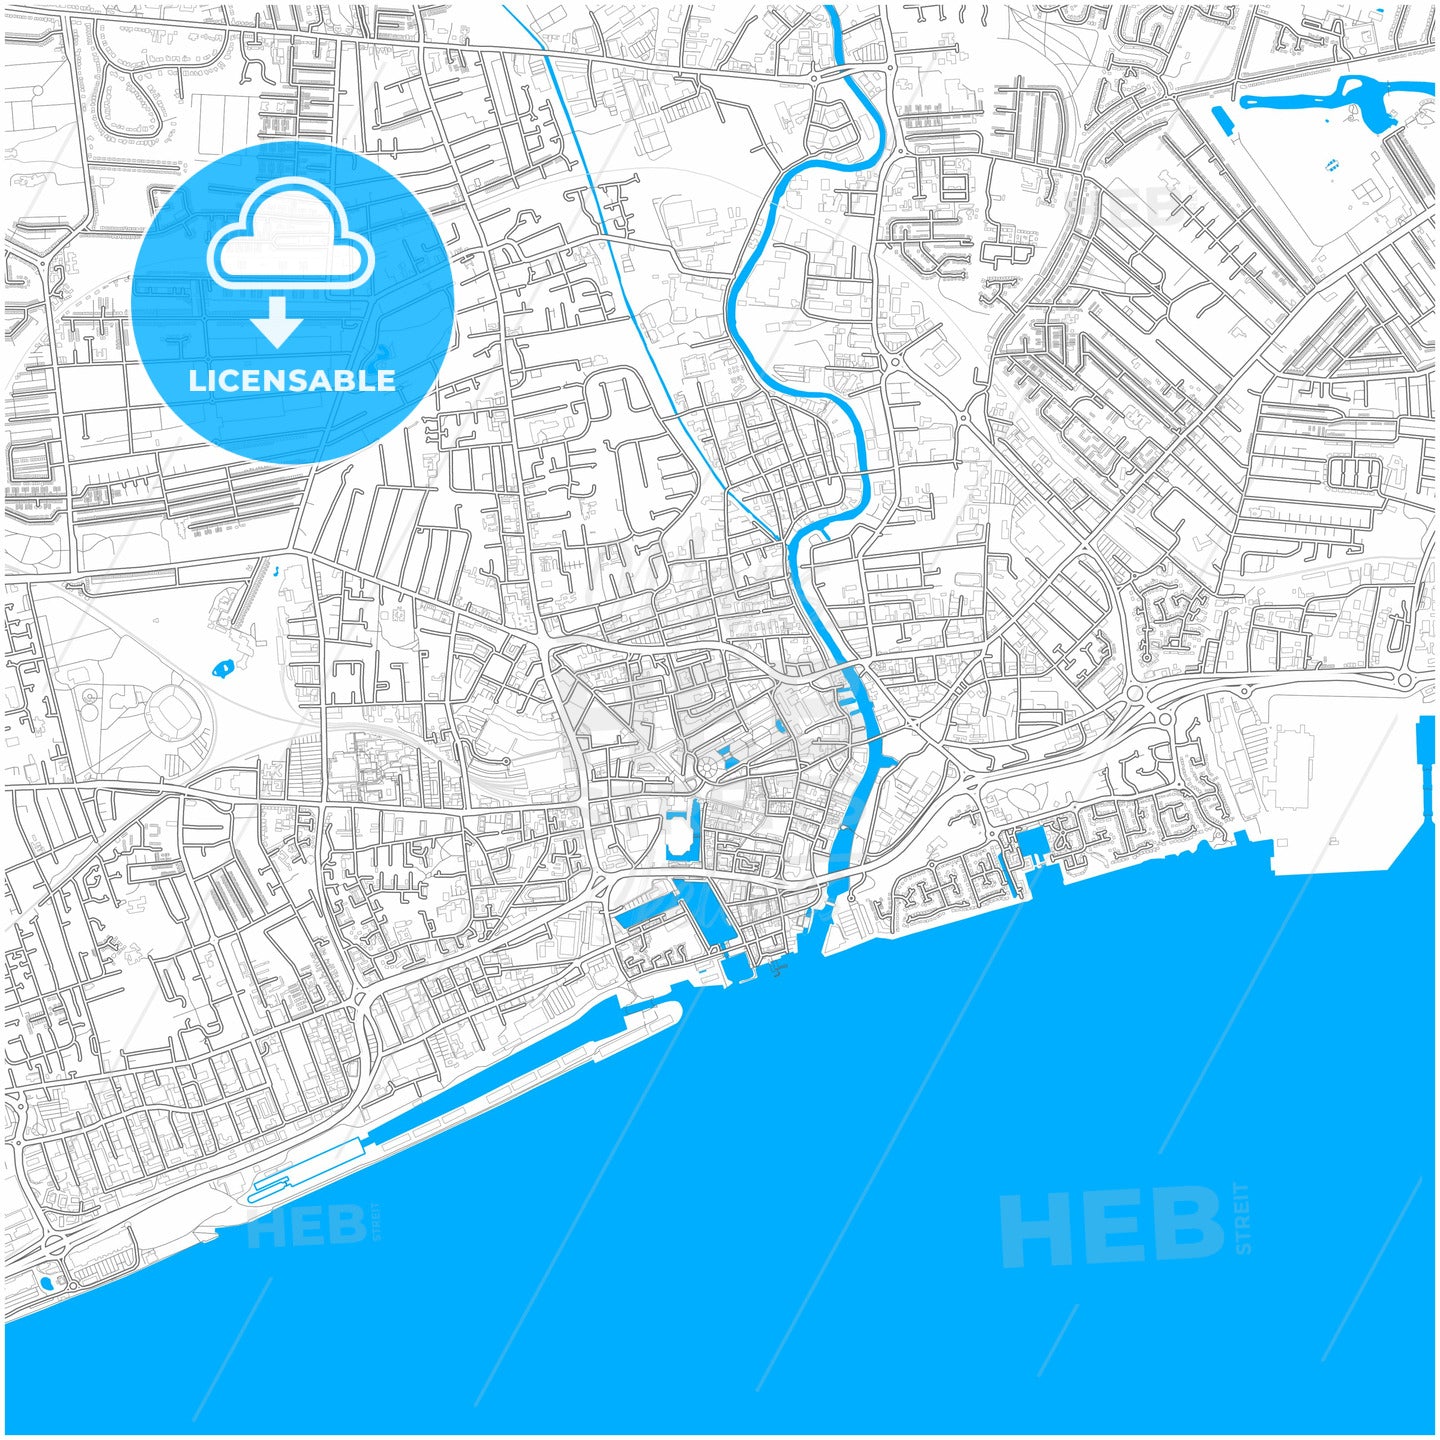 Kingston upon Hull, Yorkshire and the Humber, England, city map with high quality roads.